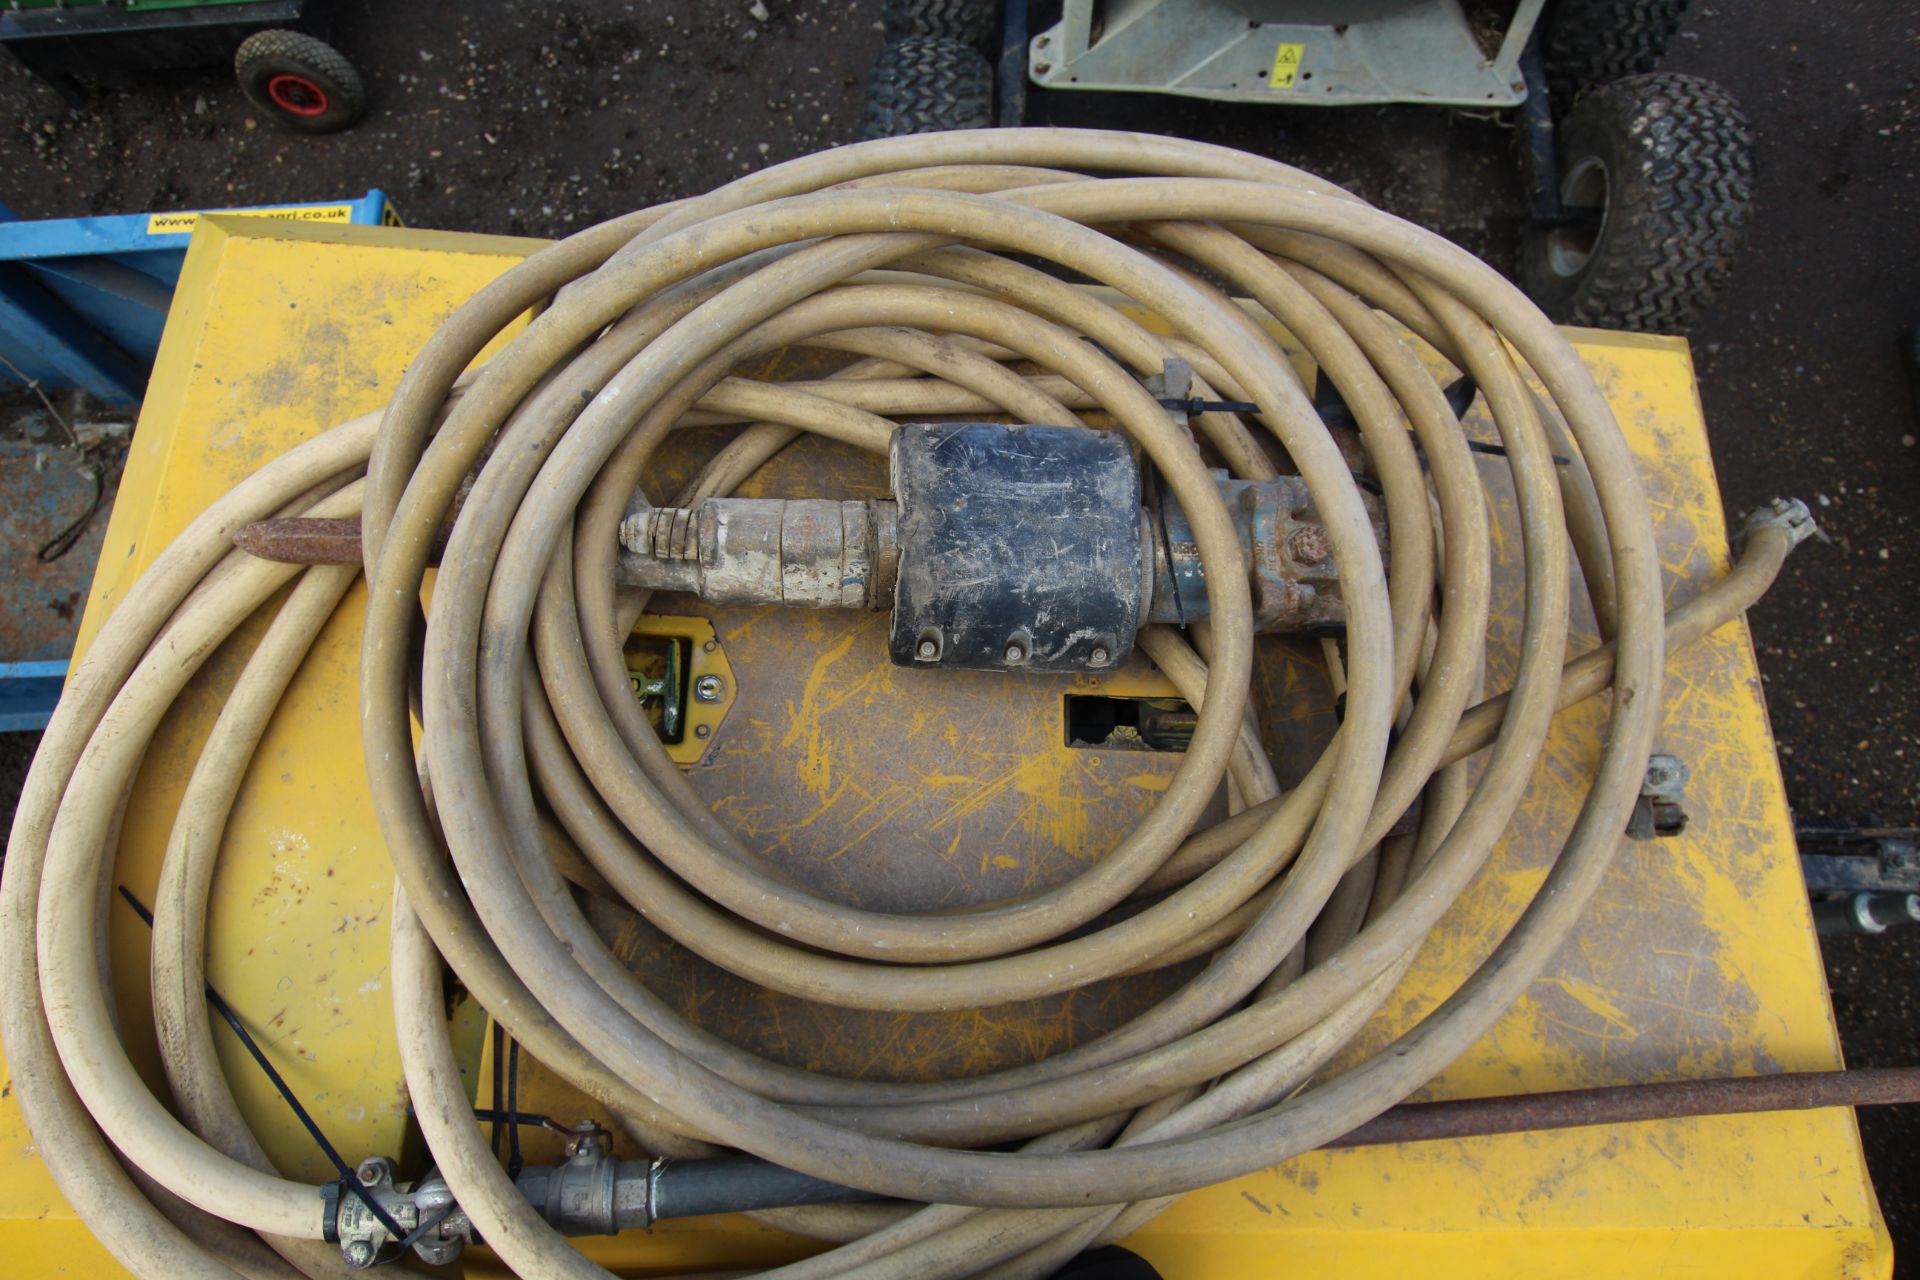 Road tow compressor. With pipes, lance and breaker - Image 19 of 28